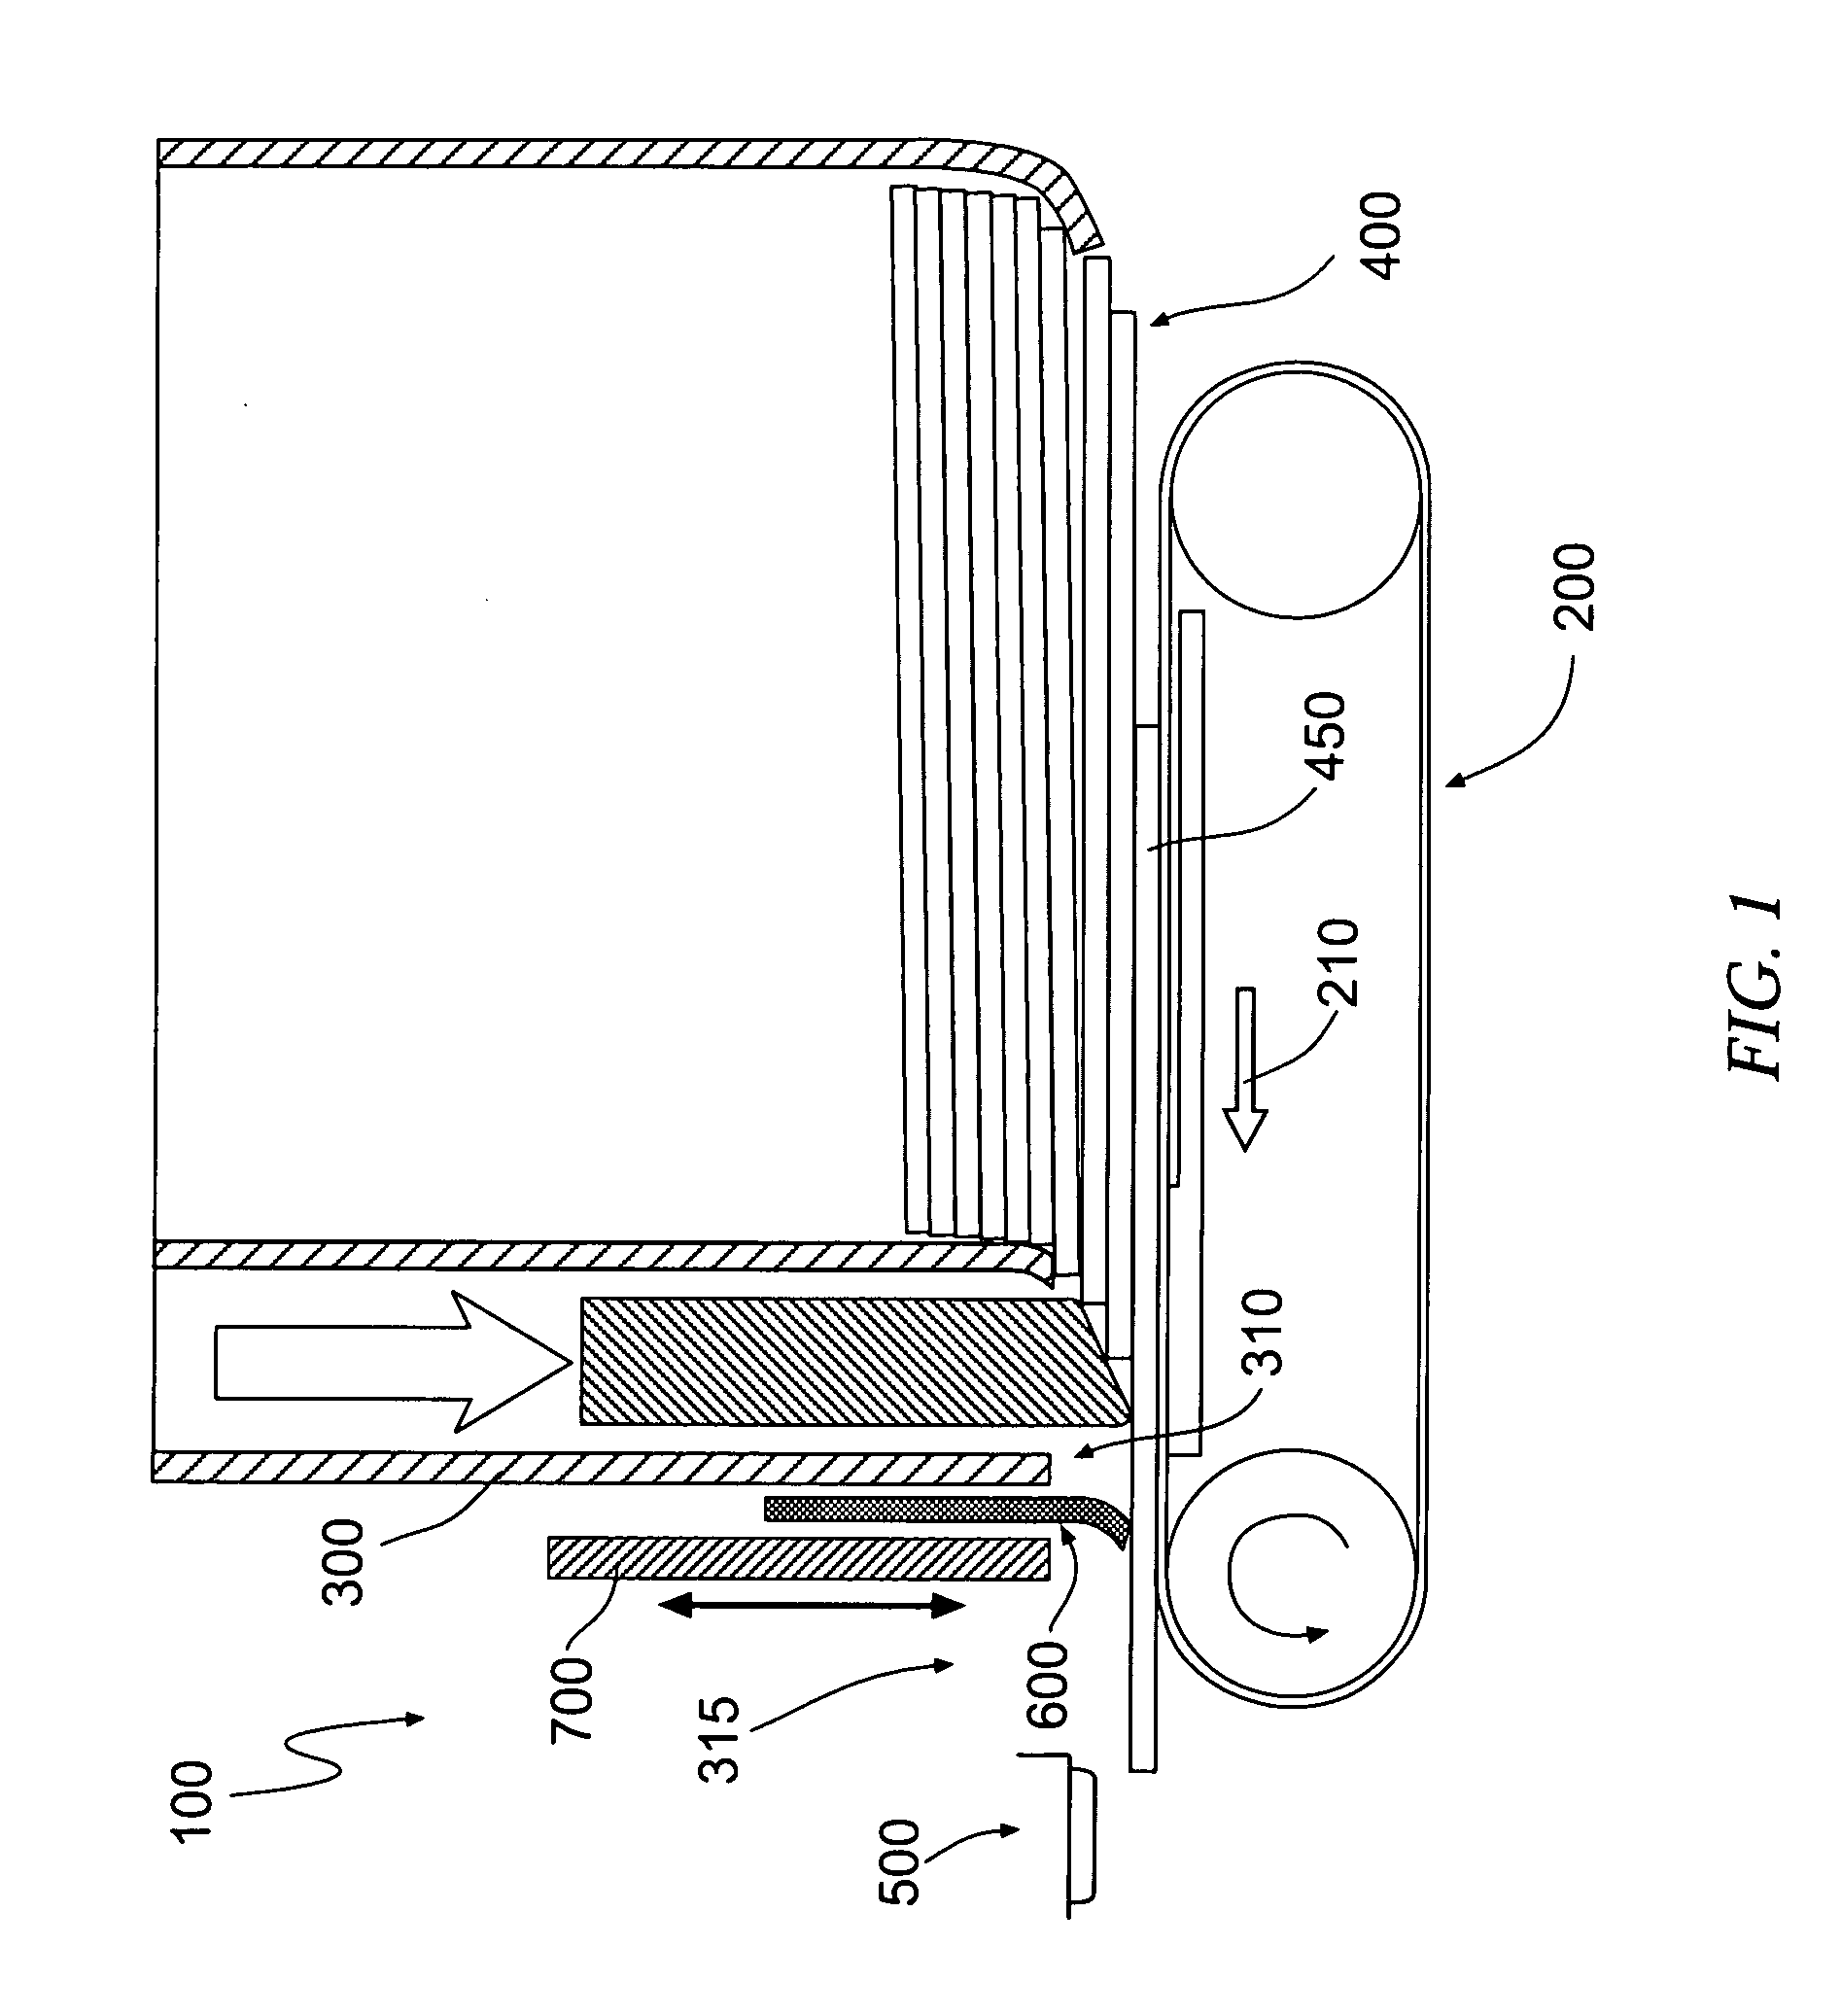 Feeder device having adjustably flexible gate apparatus and associated method